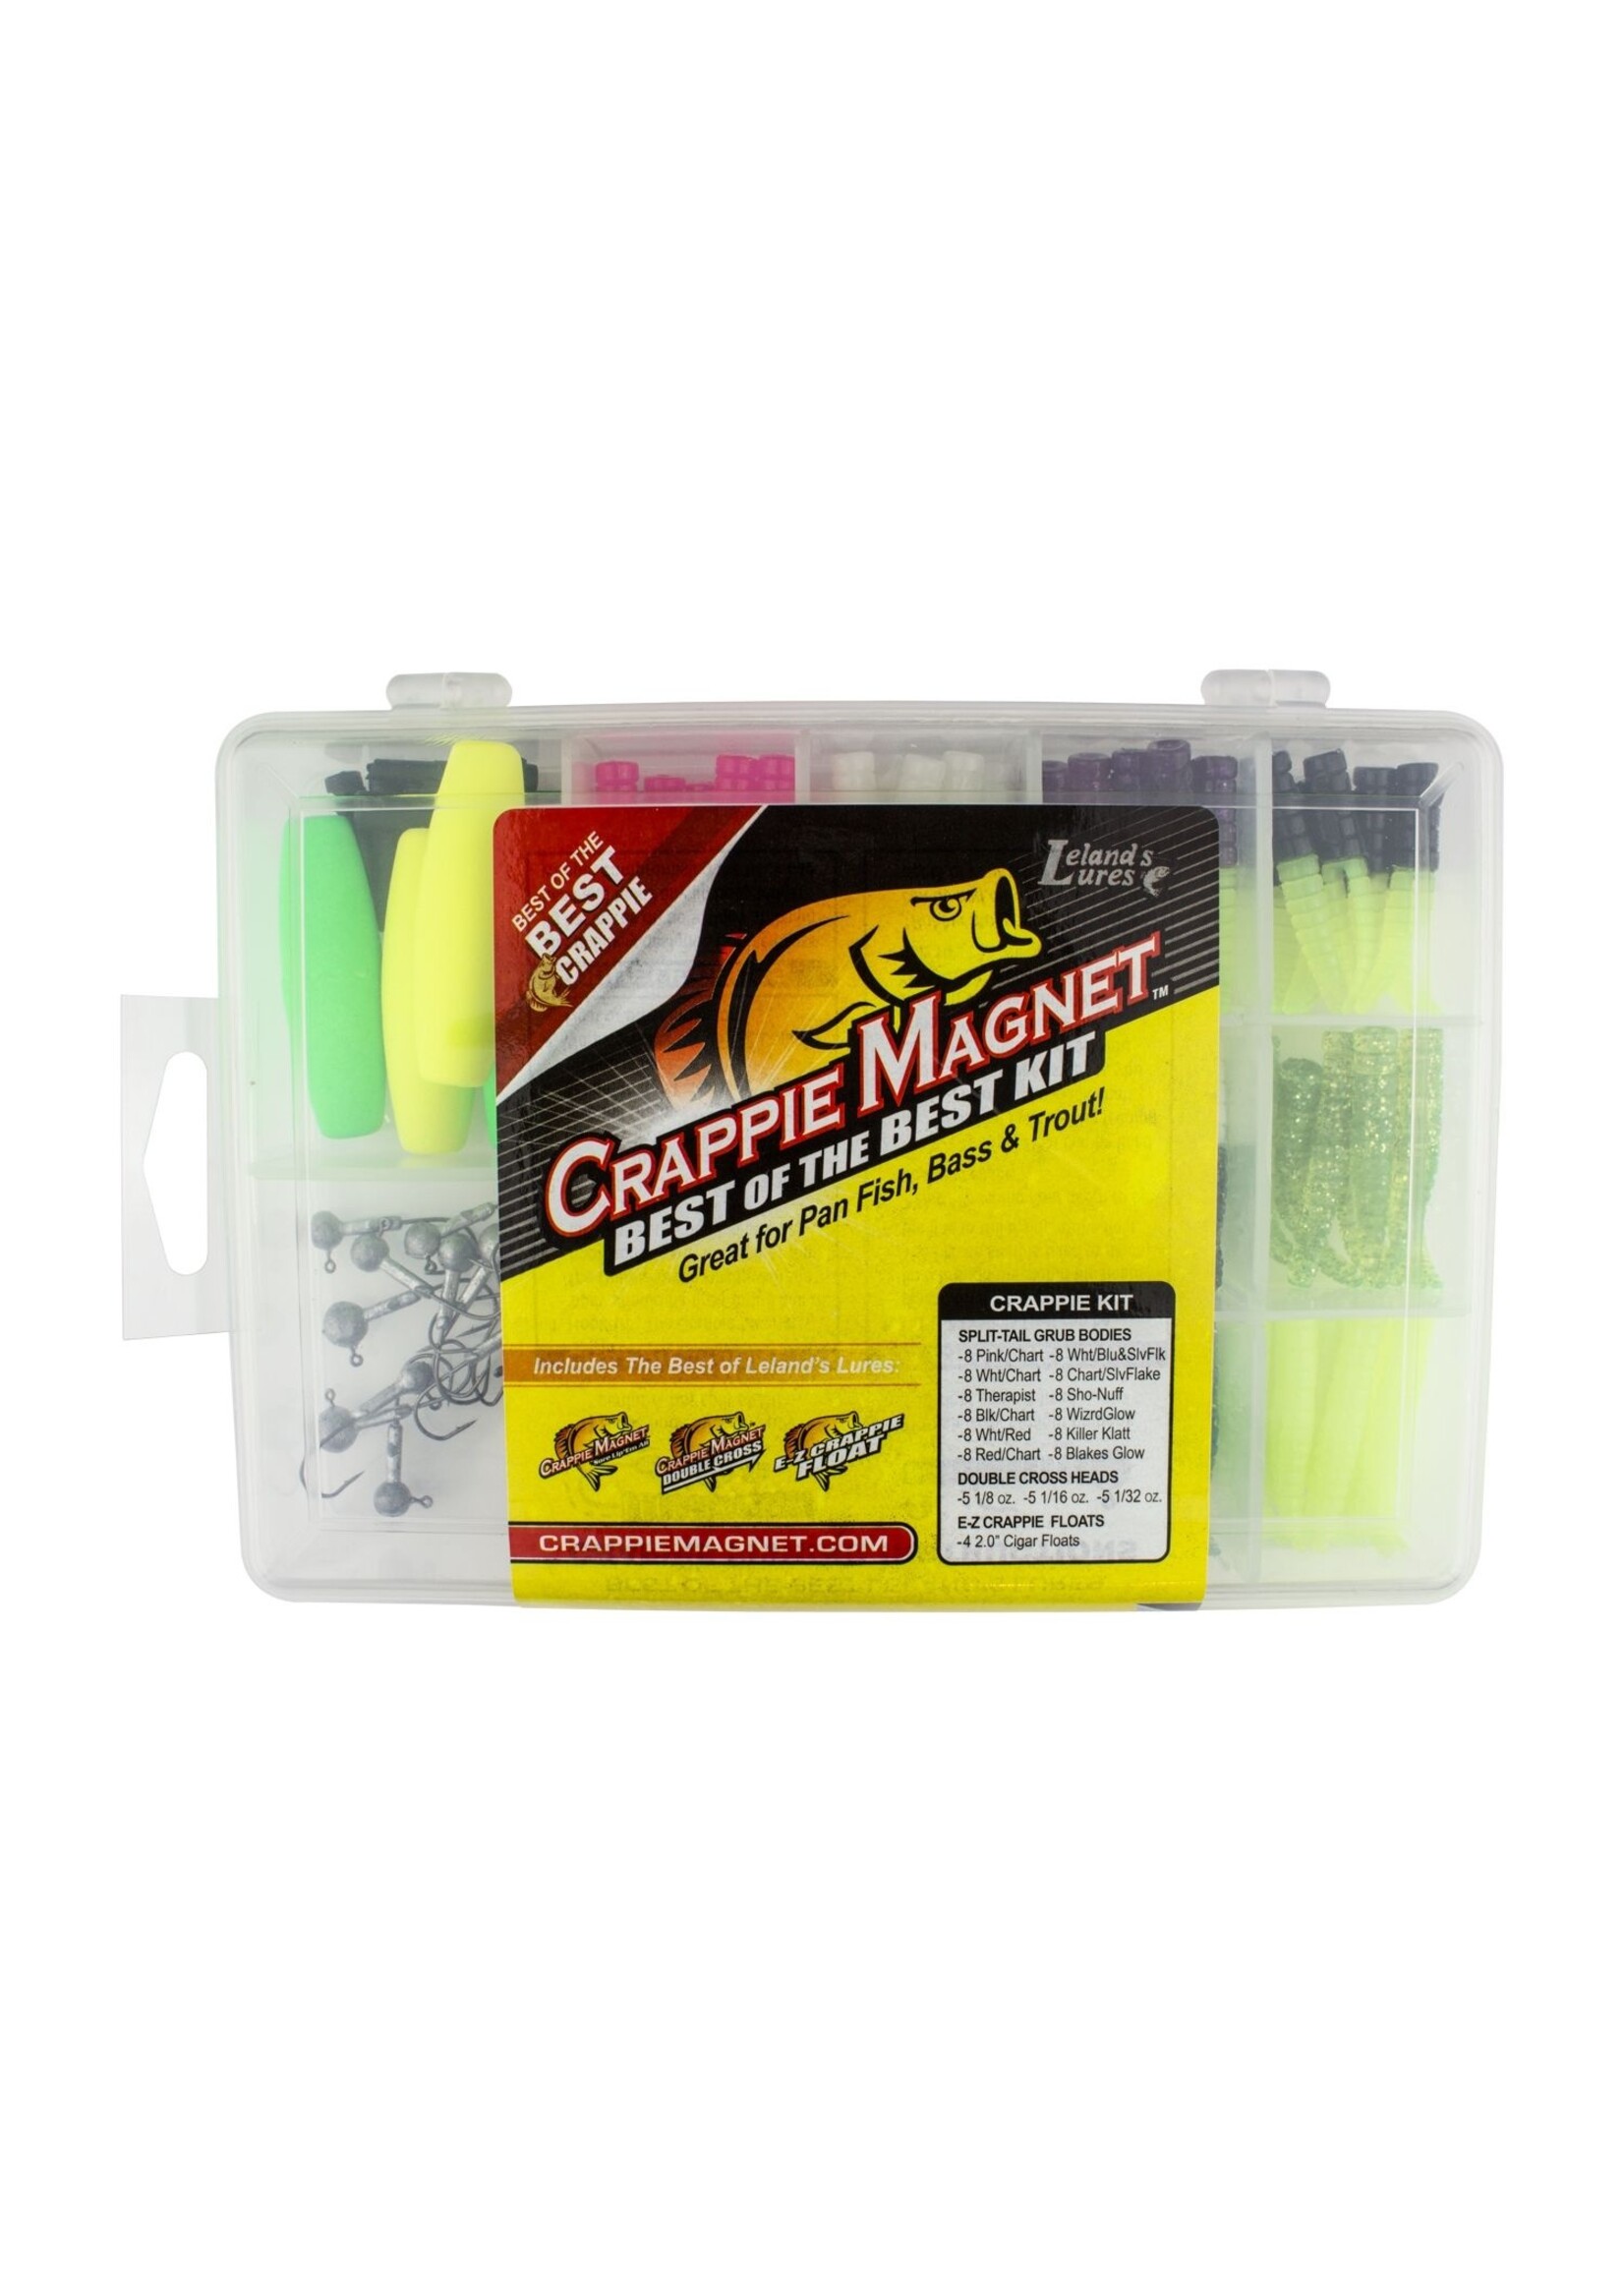 Leland Lures Crappie Magnet Best of the Best Kit